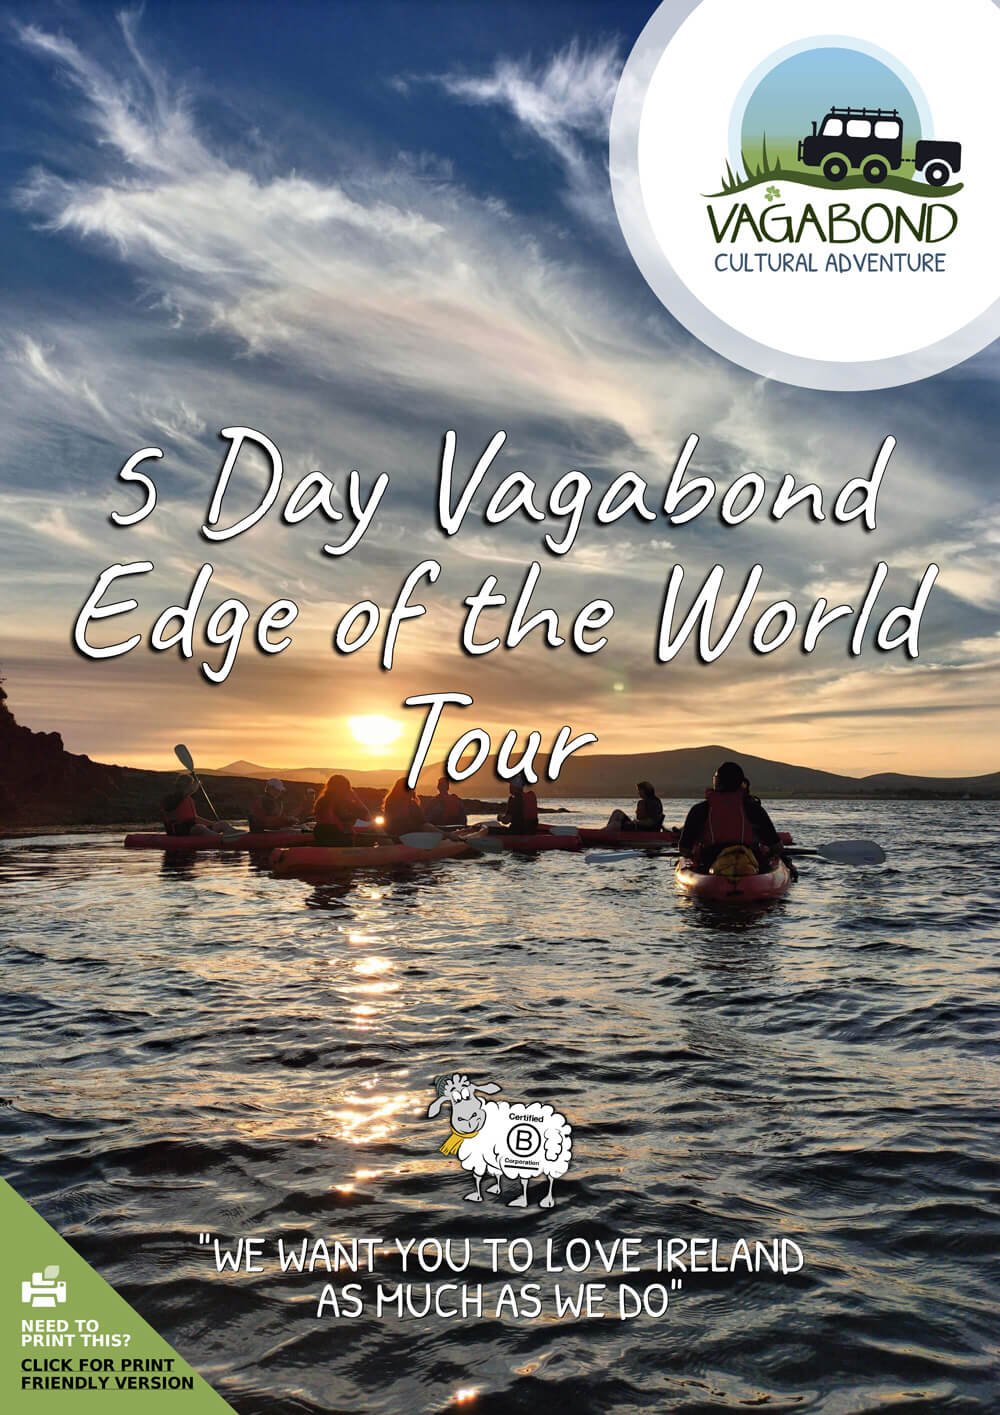 5 Day Vagabond Edge of the World itinerary cover showing kayakers